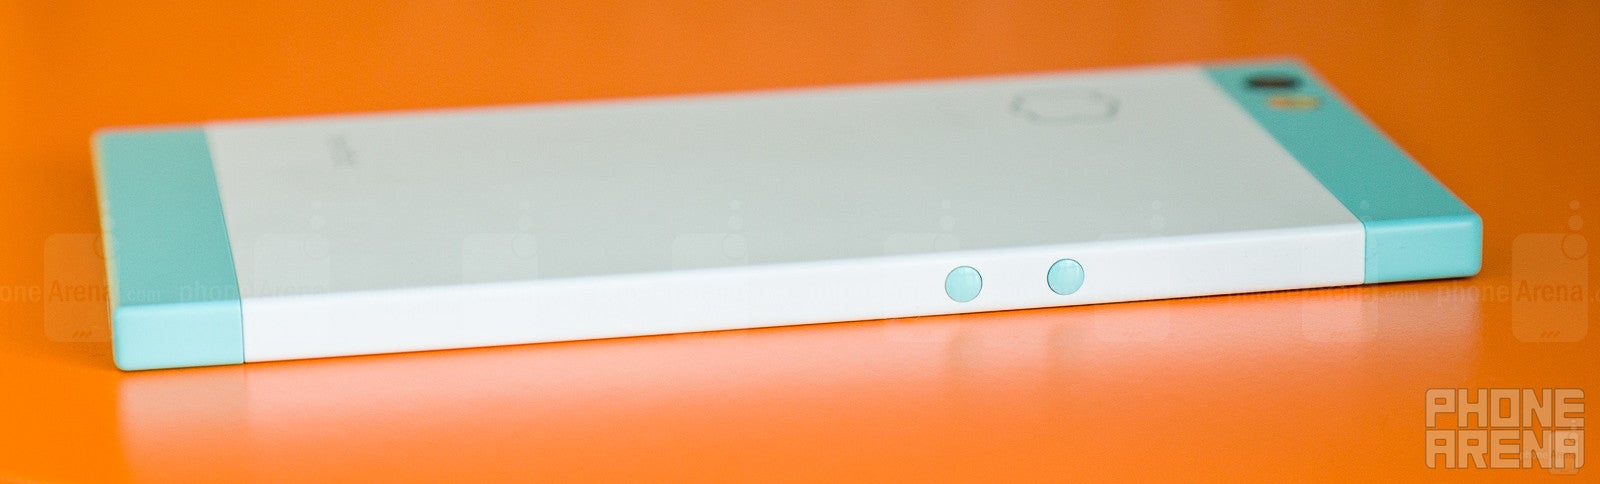 Deal: the Nextbit Robin cloud phone is $100 cheaper for a limited time